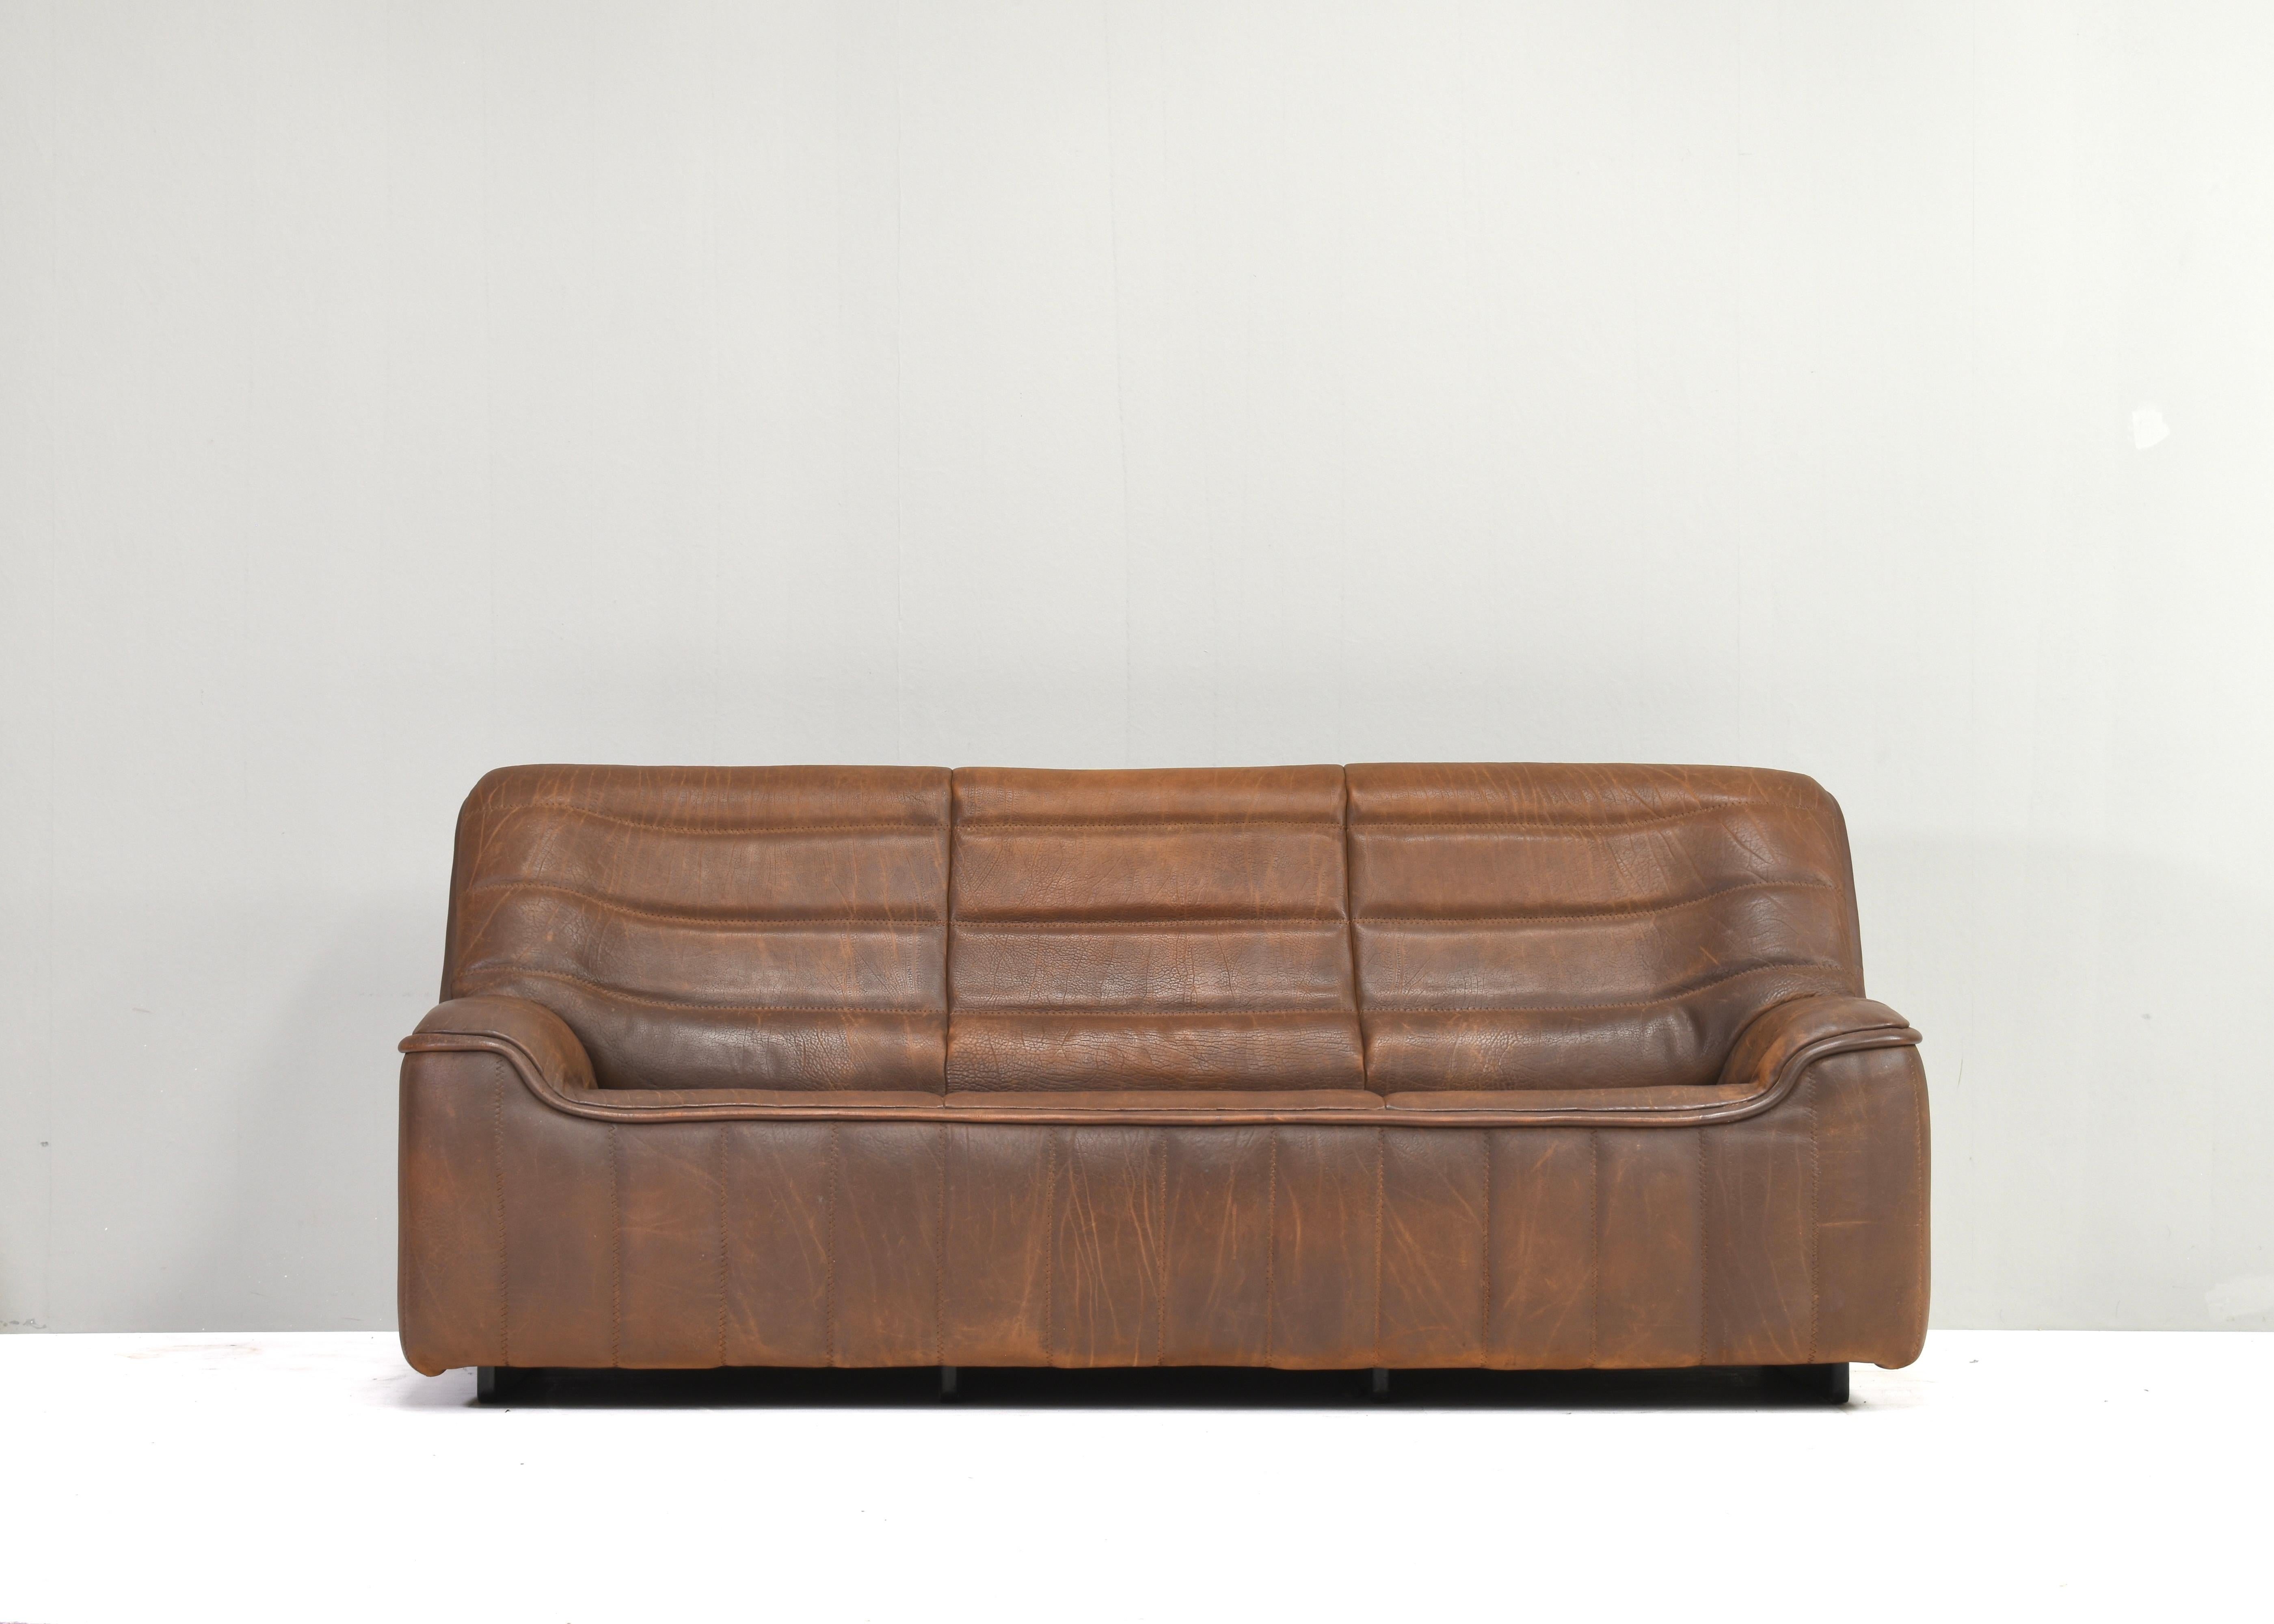 Introducing the De Sede DS84 three seat sofa in Buffalo leather - Switzerland, 1970's – Where Luxury Meets Comfort

Also available with 2 seat sofa and coffee table.

Designer: De Sede design team
Manufacturer: De Sede
Model: DS-84 three seat